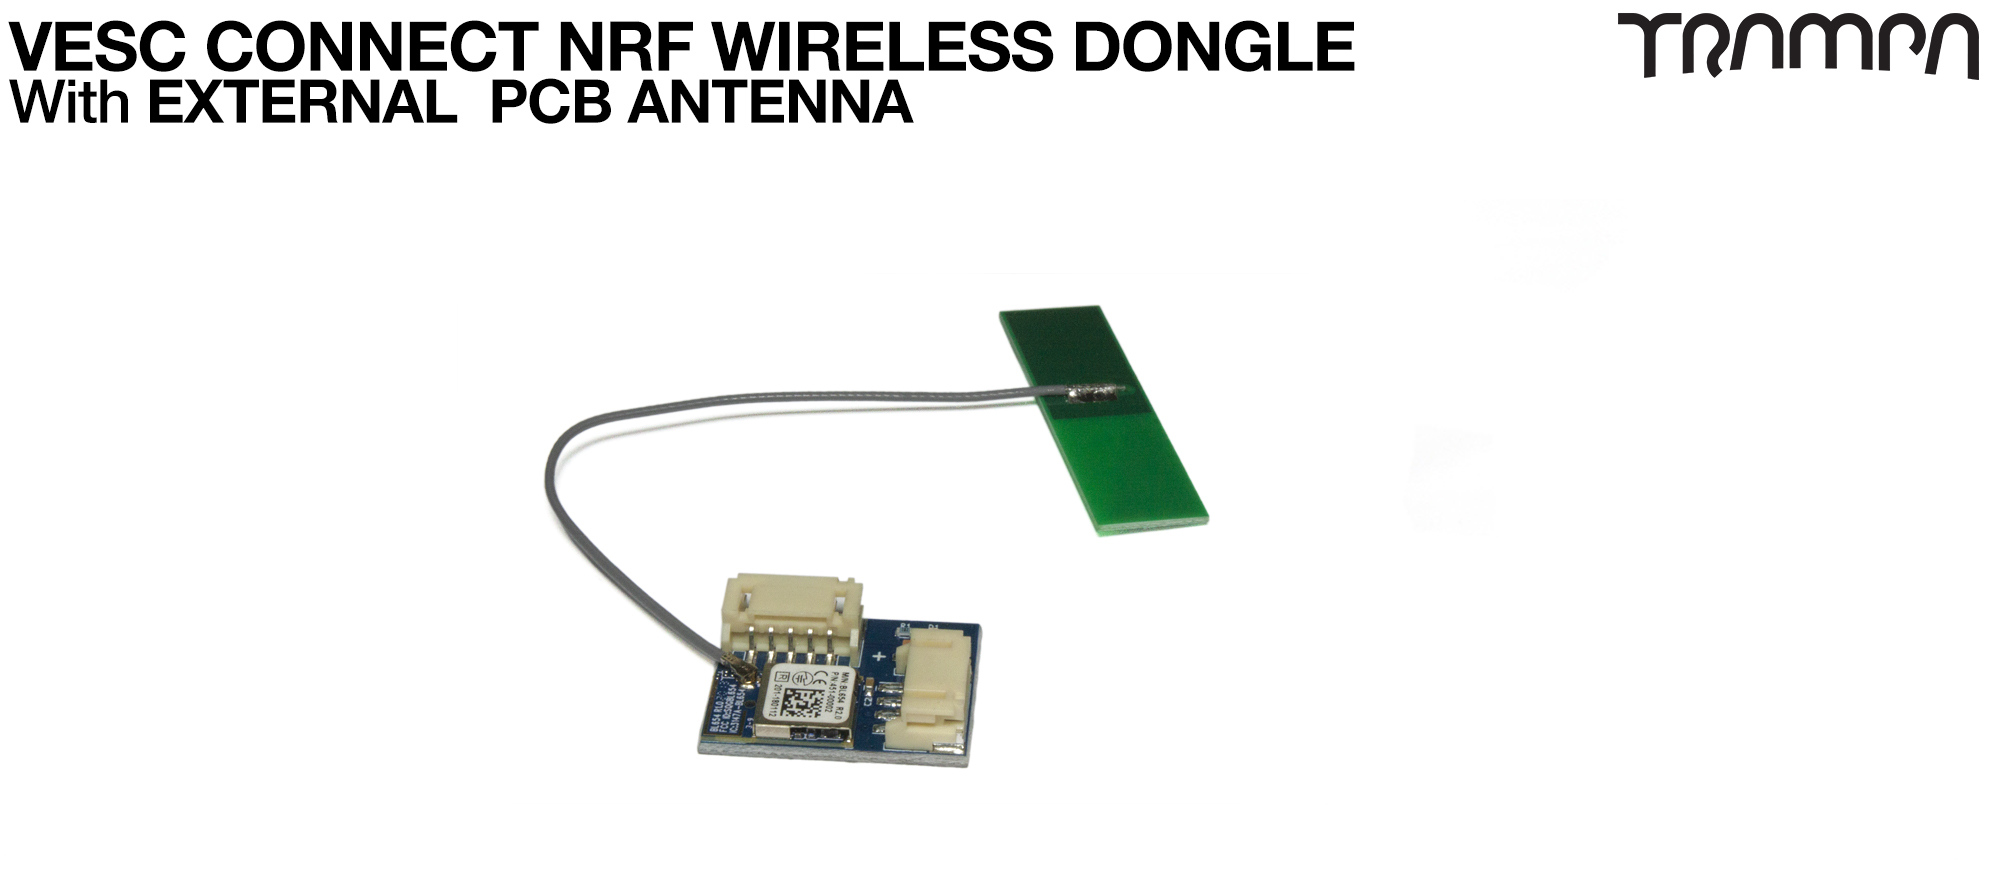 VESC Connect NRF Wireless Dongle with EXTERNAL PCB ANTENNA 